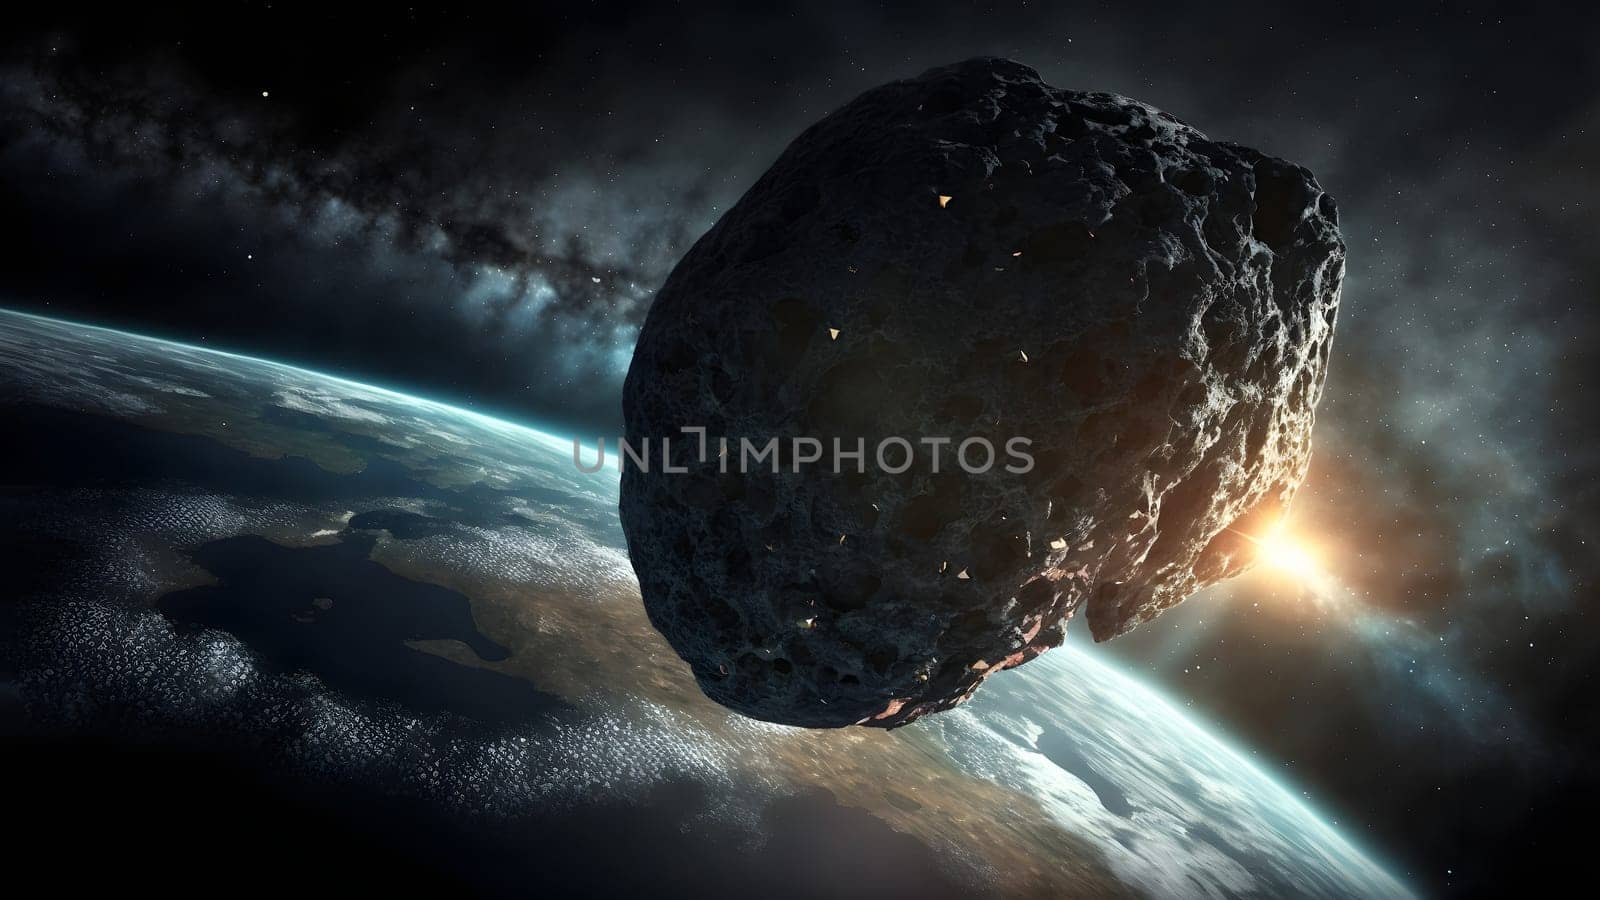 Giant asteroid cruising near planet Earth. neural network generated art by z1b